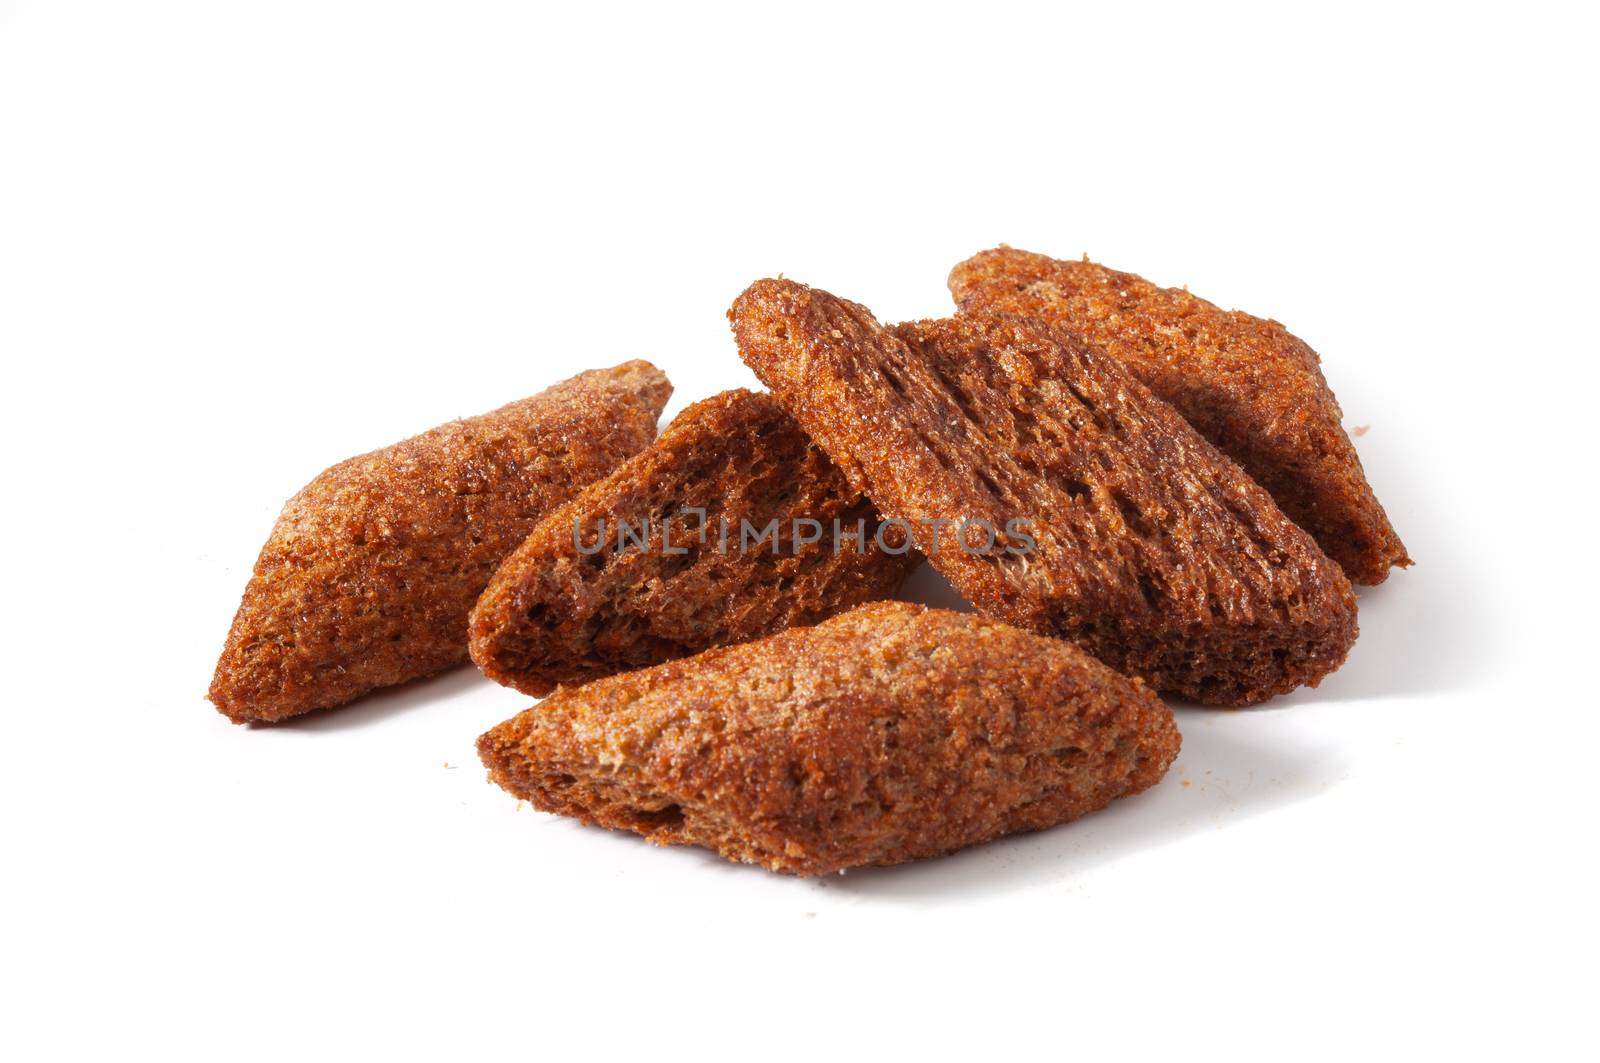 Isolated handful of croutons on the white background